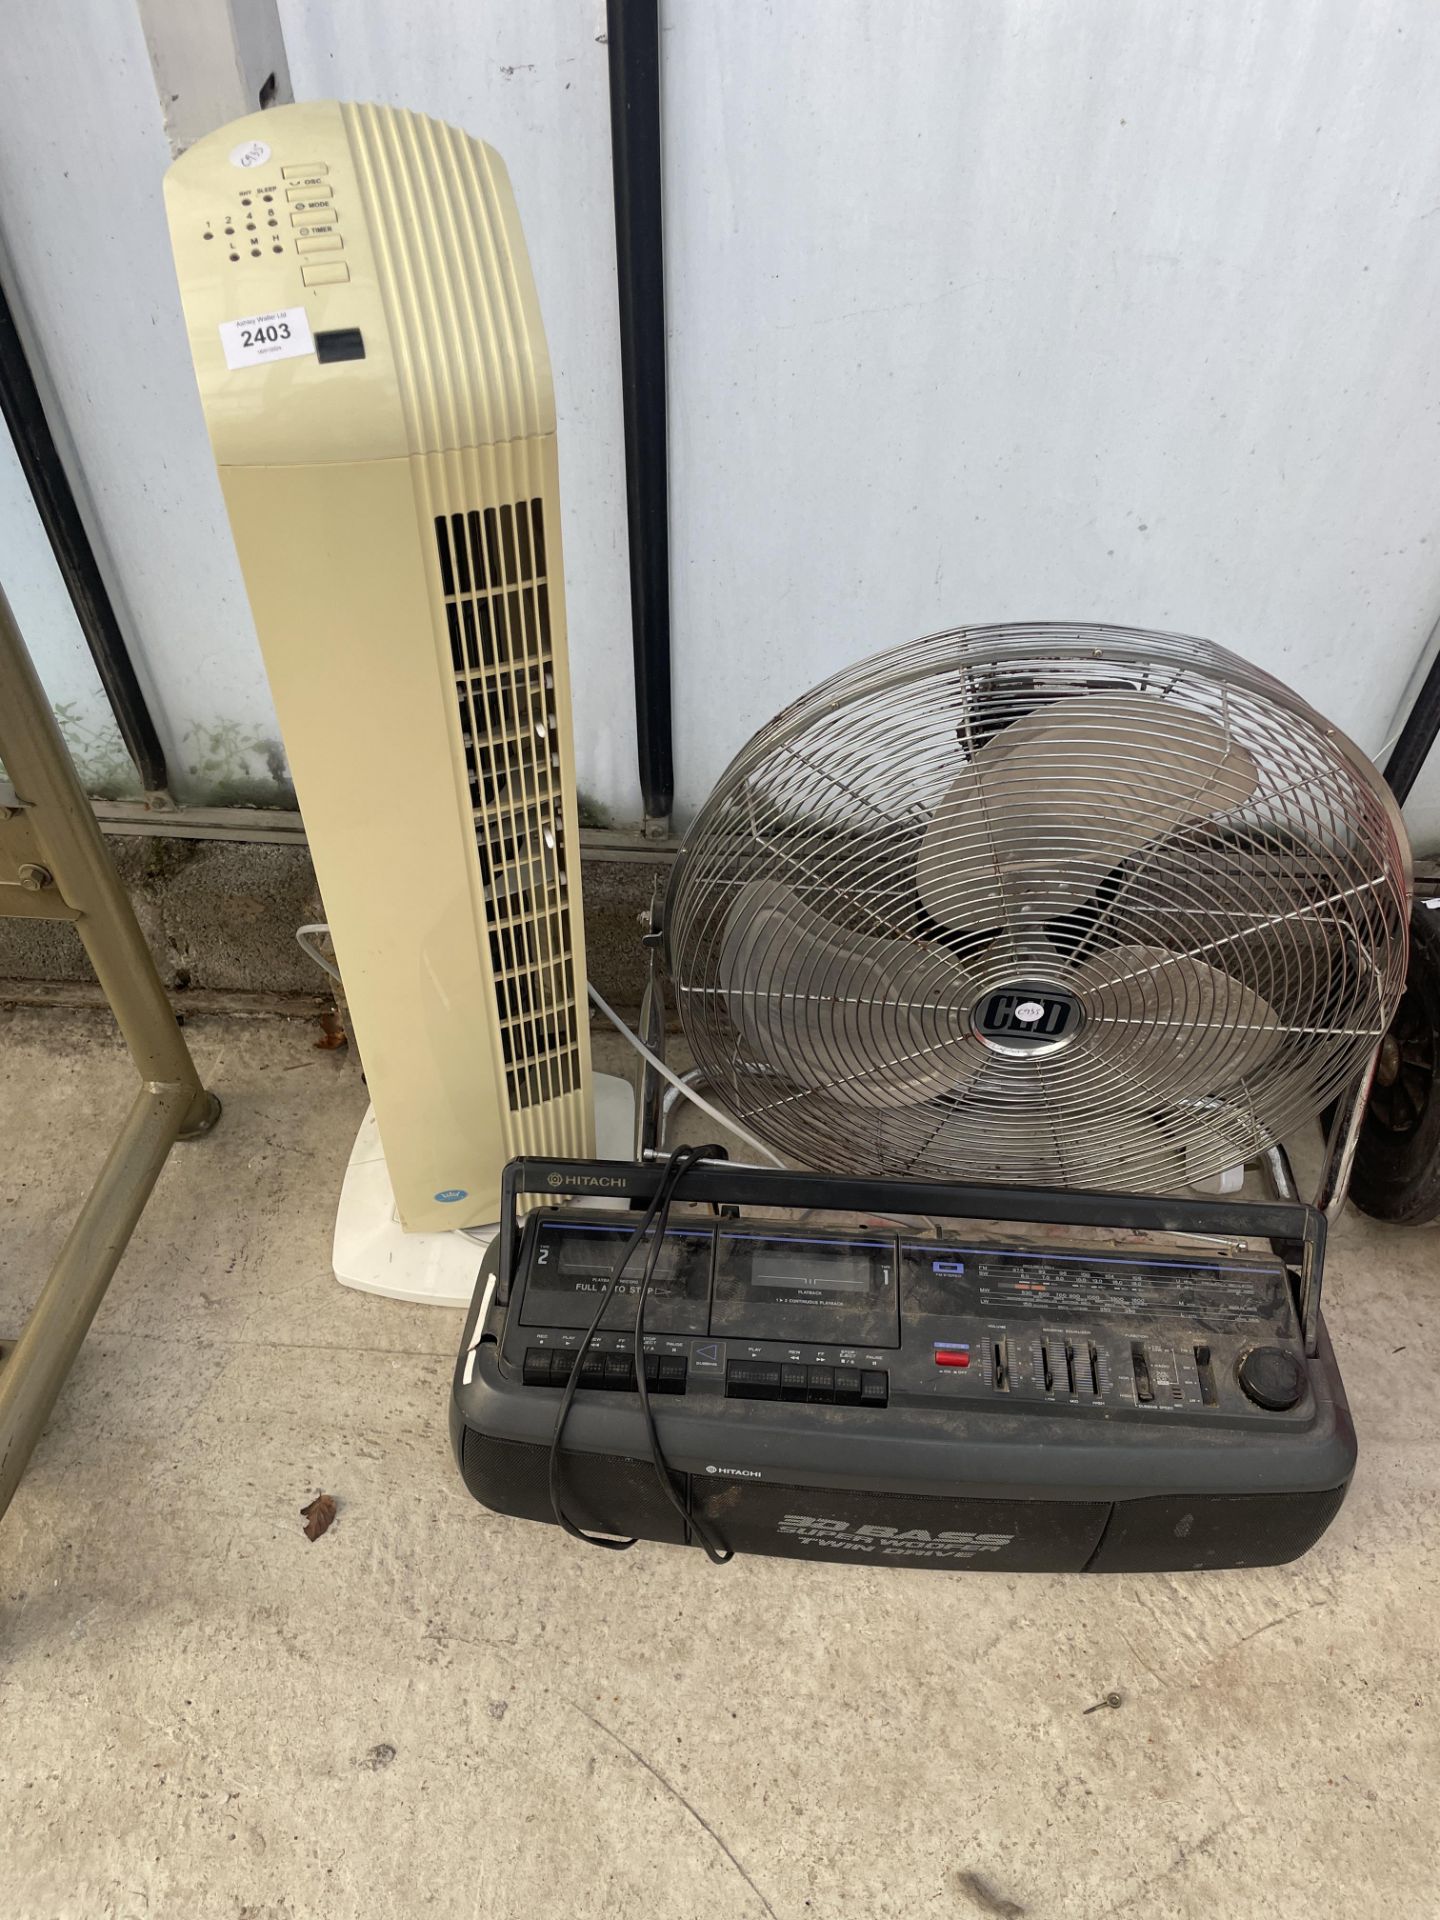 TWO FANS AND AN HITACHI RADIO